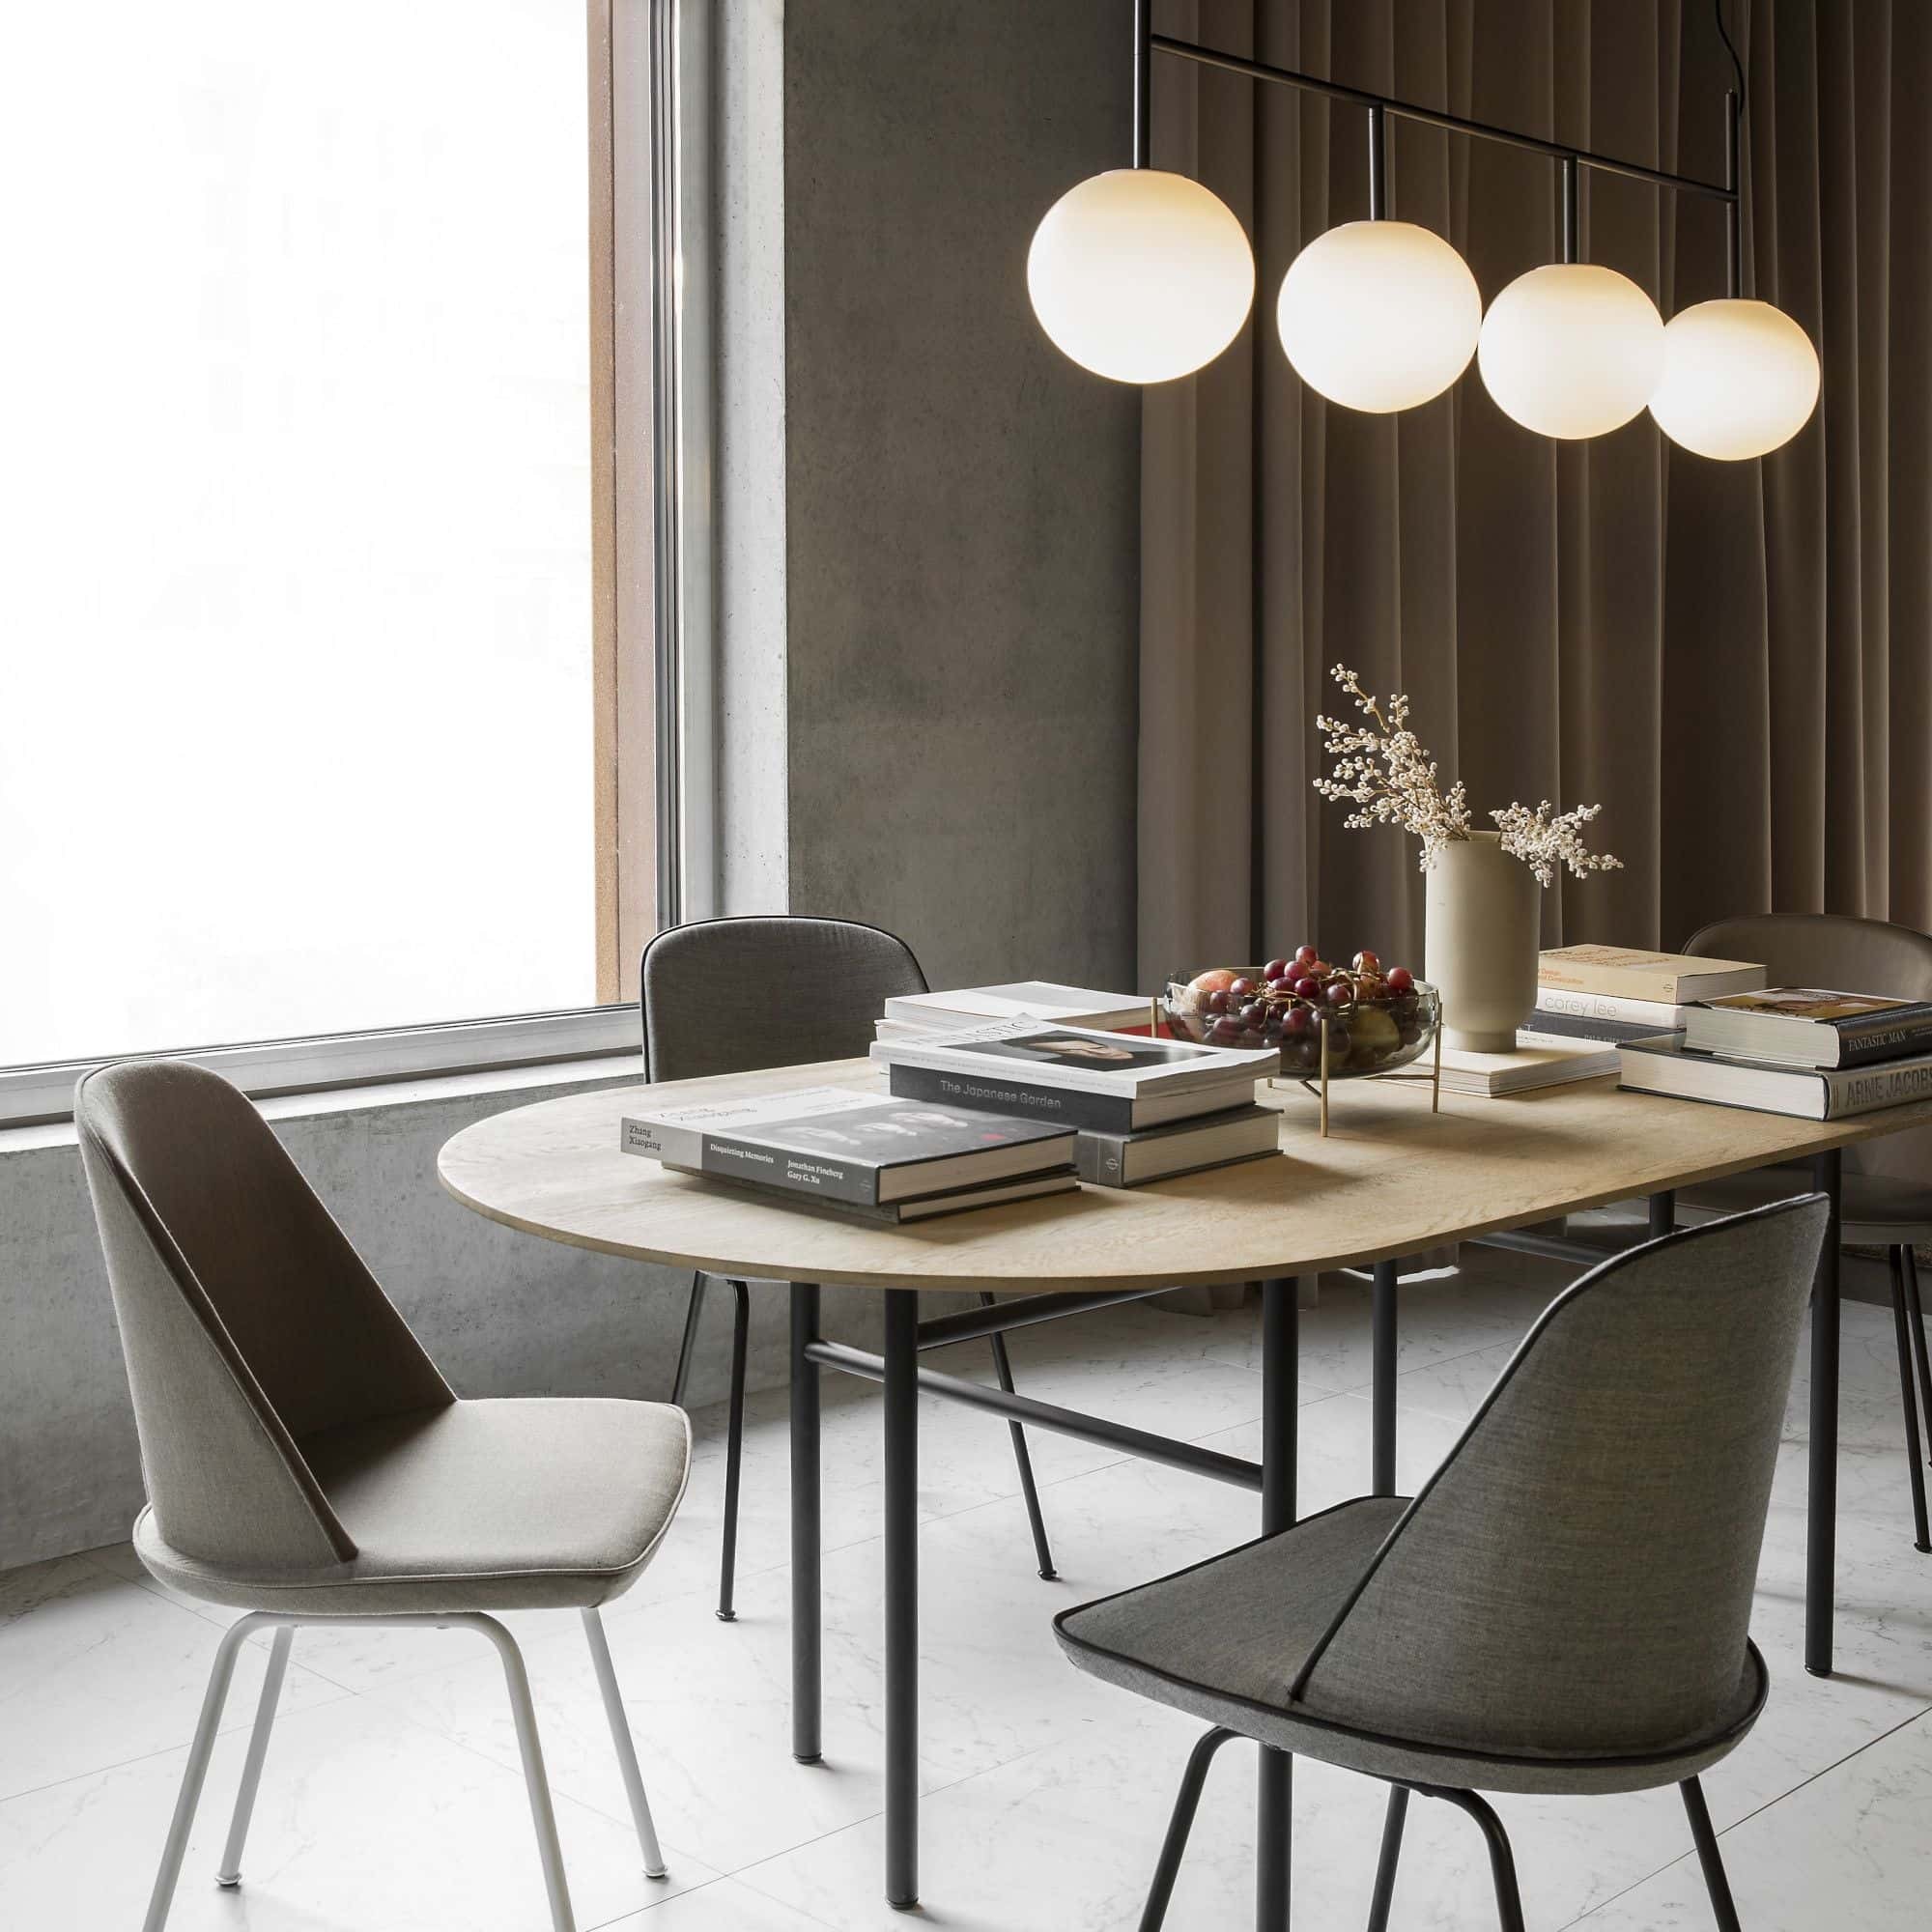 four bulb pendant light over brown oval dining table